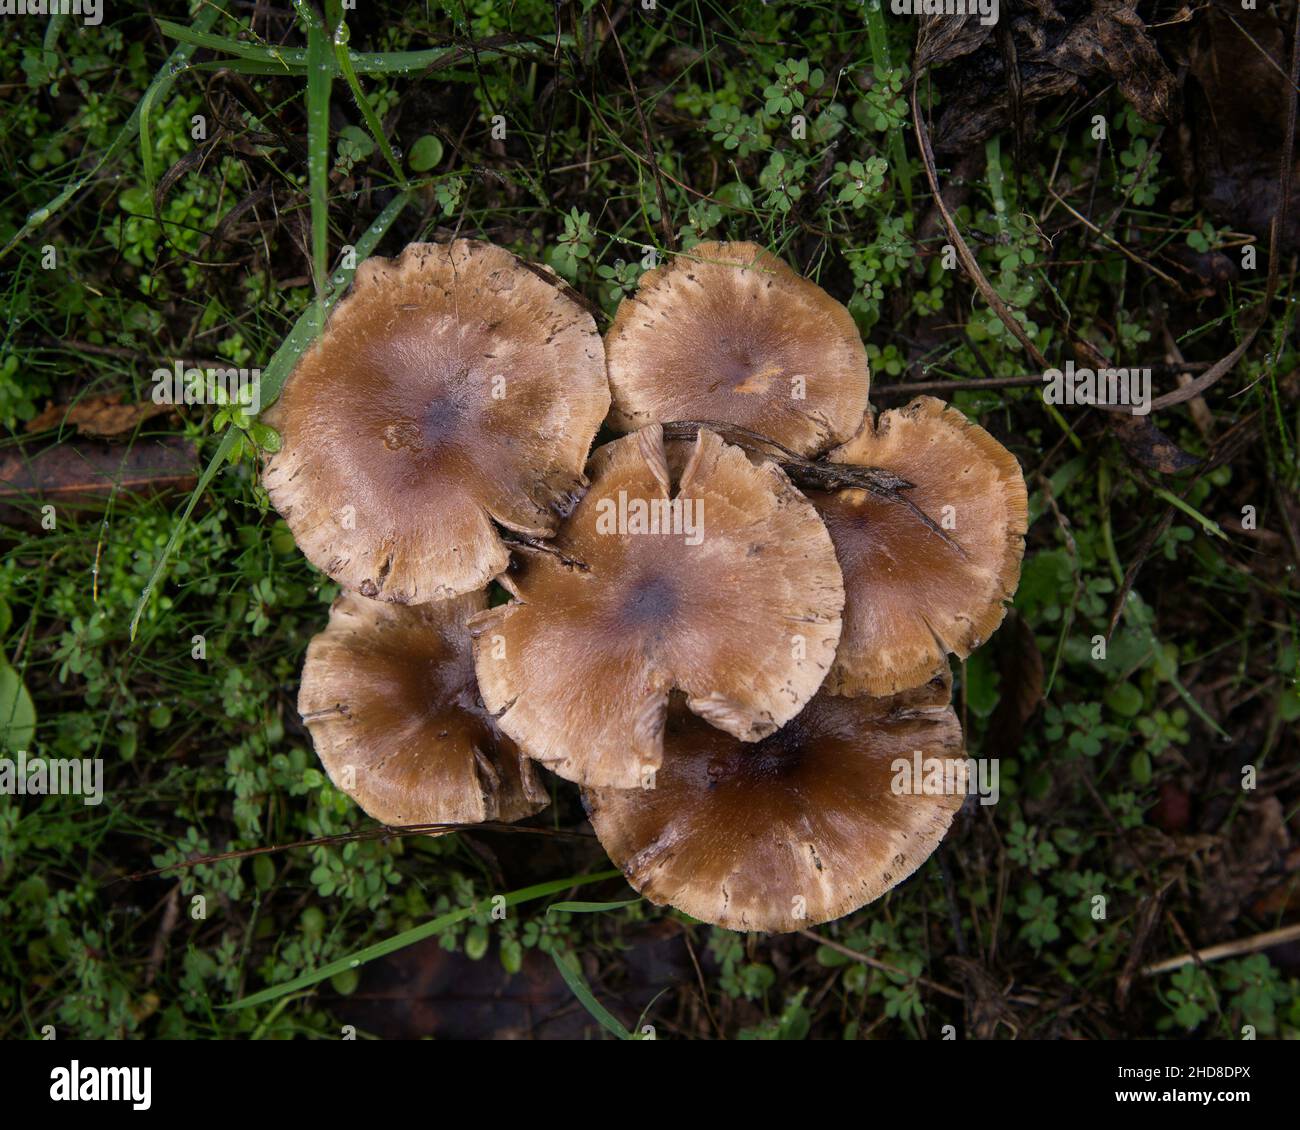 A close-up of an Armillaria sp. or honey fungi in Pfeiffer Big Sur SP, Big Sur, CA. The mushroom grows in damp and wooded areas. Stock Photo